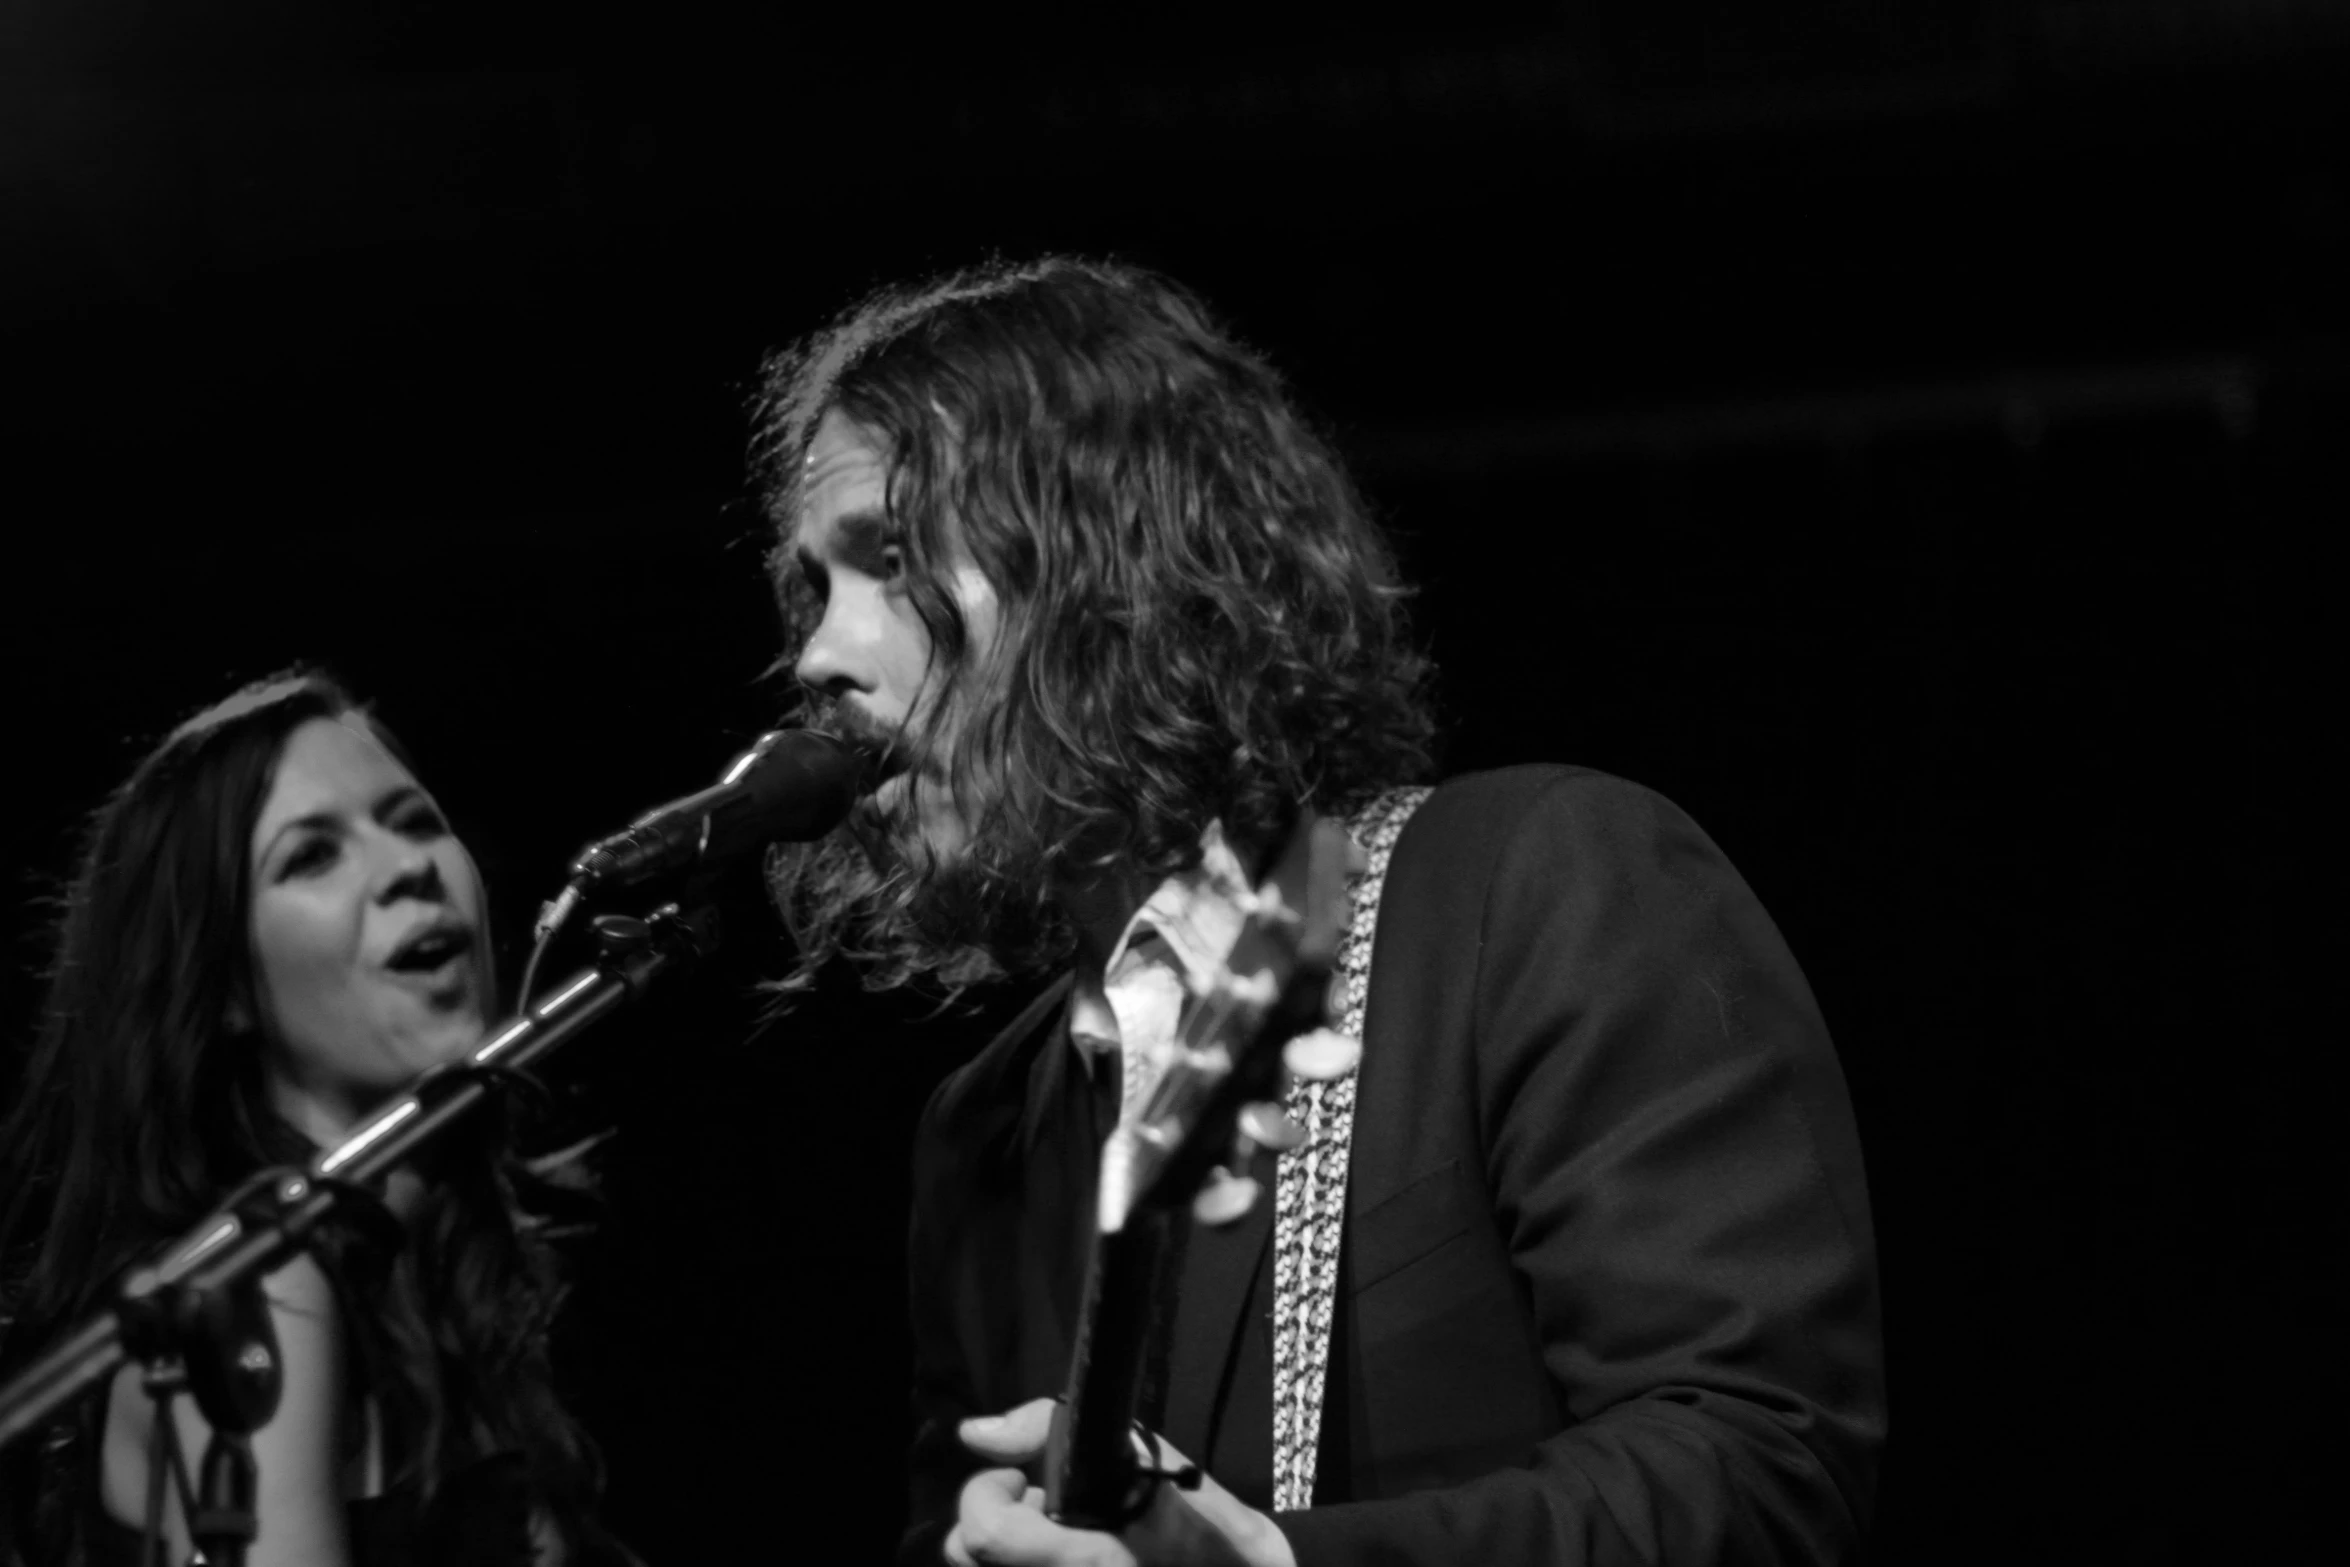 a man and woman singing into microphones at a concert